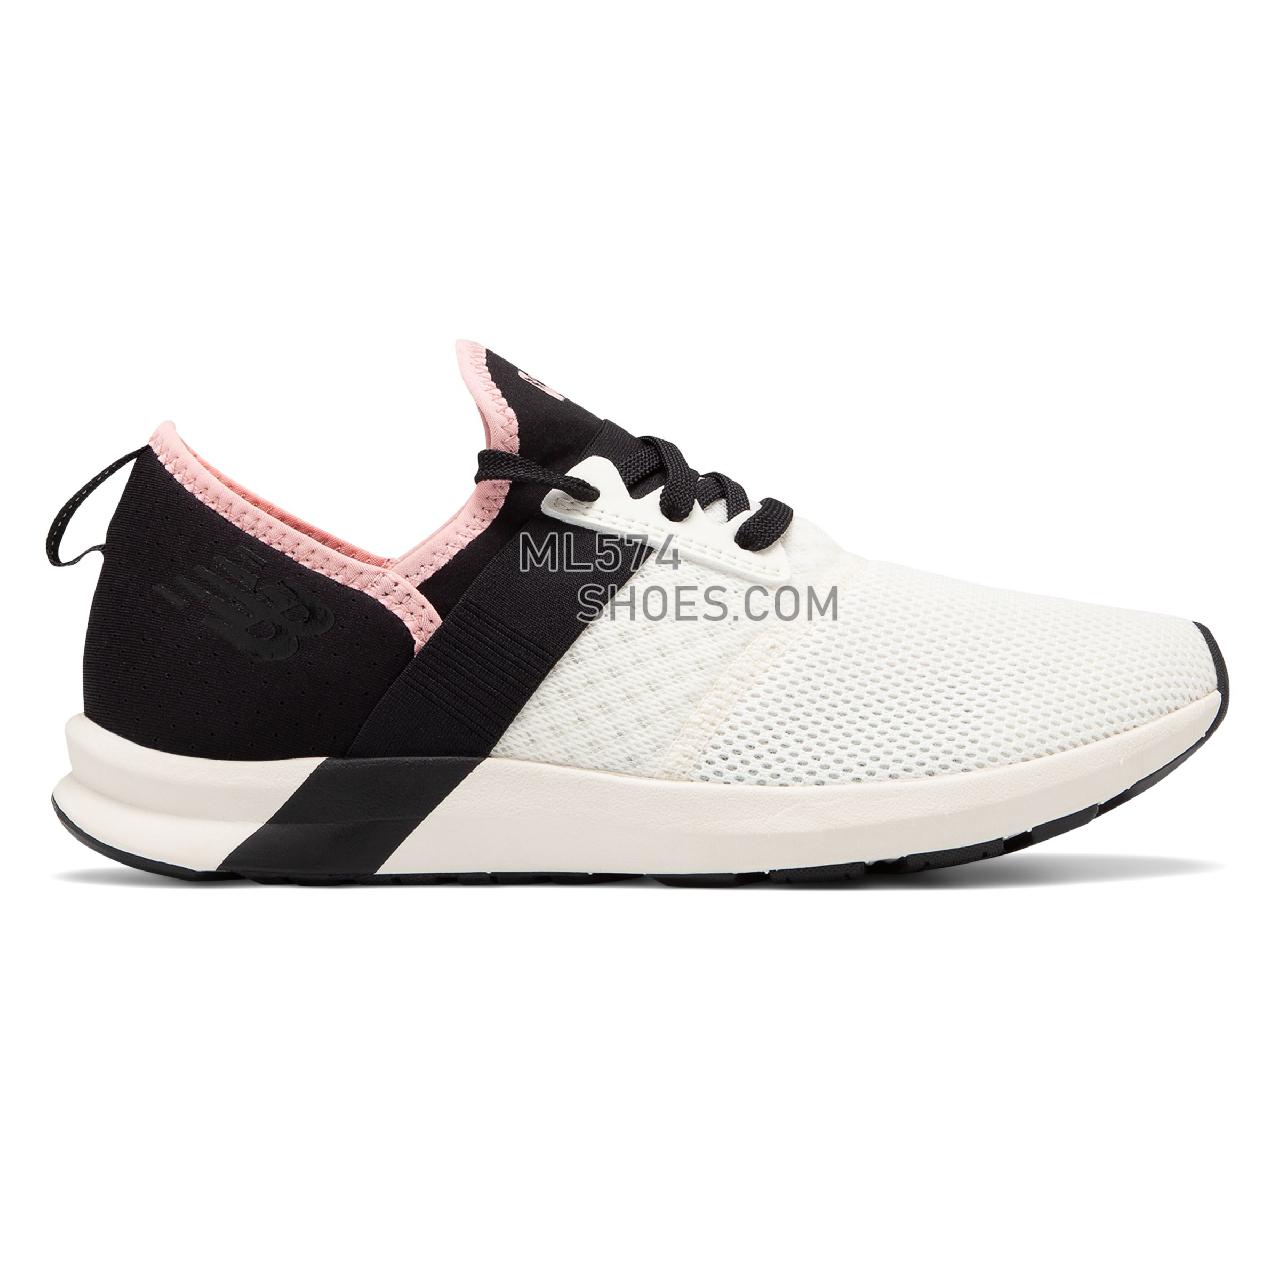 New Balance FuelCore NERGIZE - Women's Whats Trending - Sea Salt with Black and Guava Glo - WXNRGNS